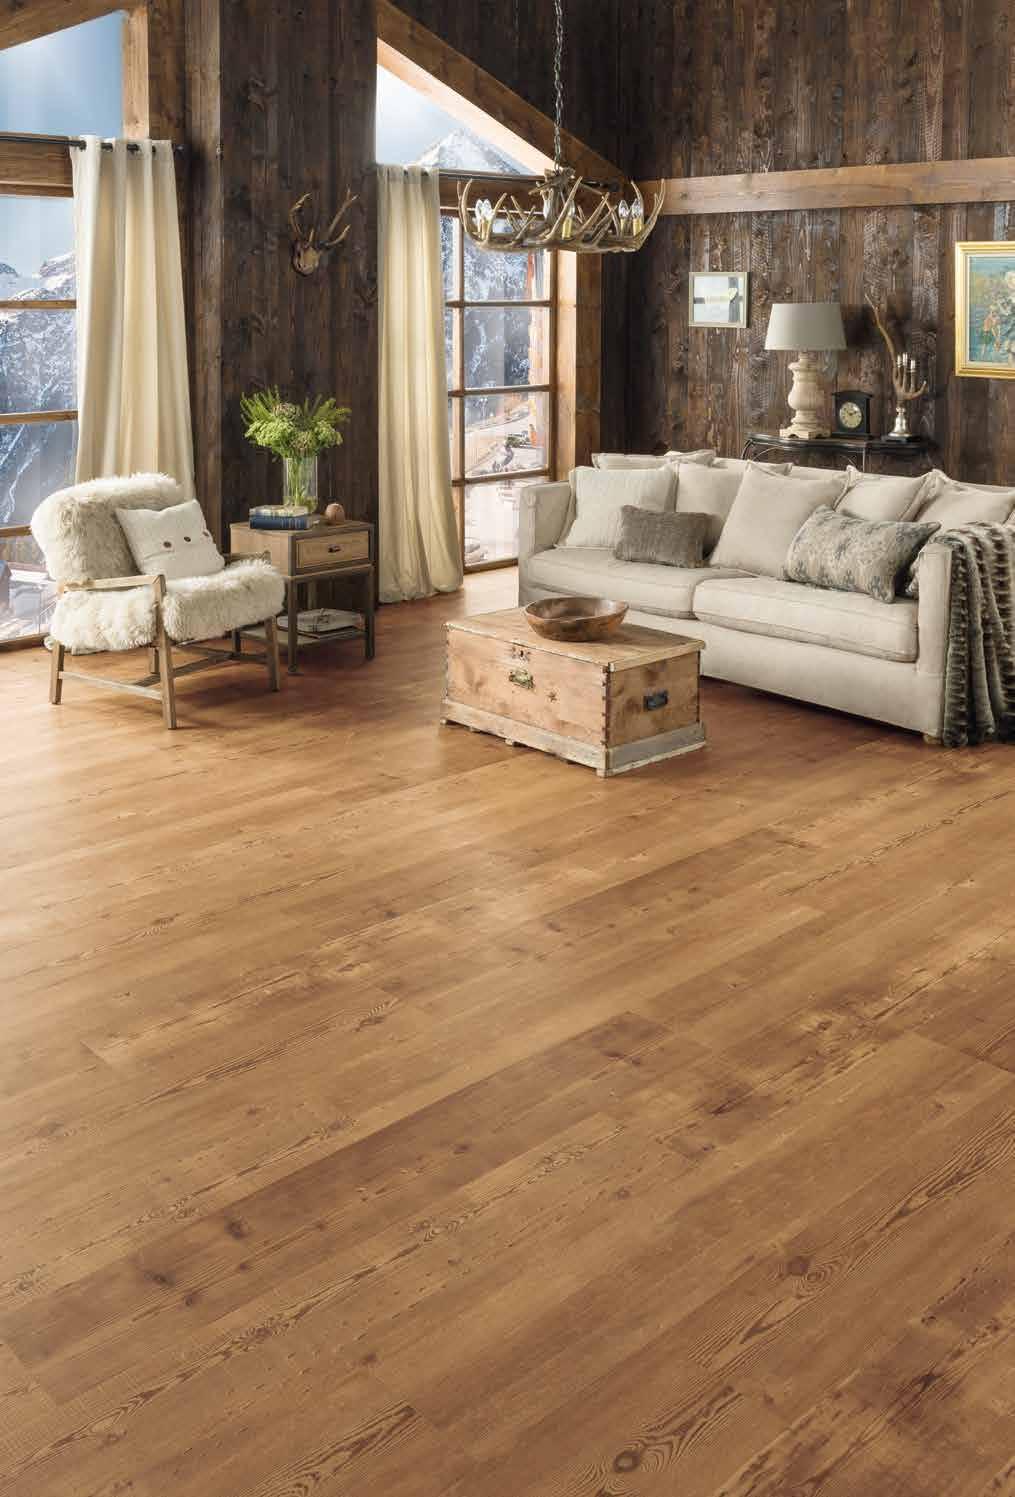 Reclaimed Heart Pine provides the authentic, rustic appearance of unfinished